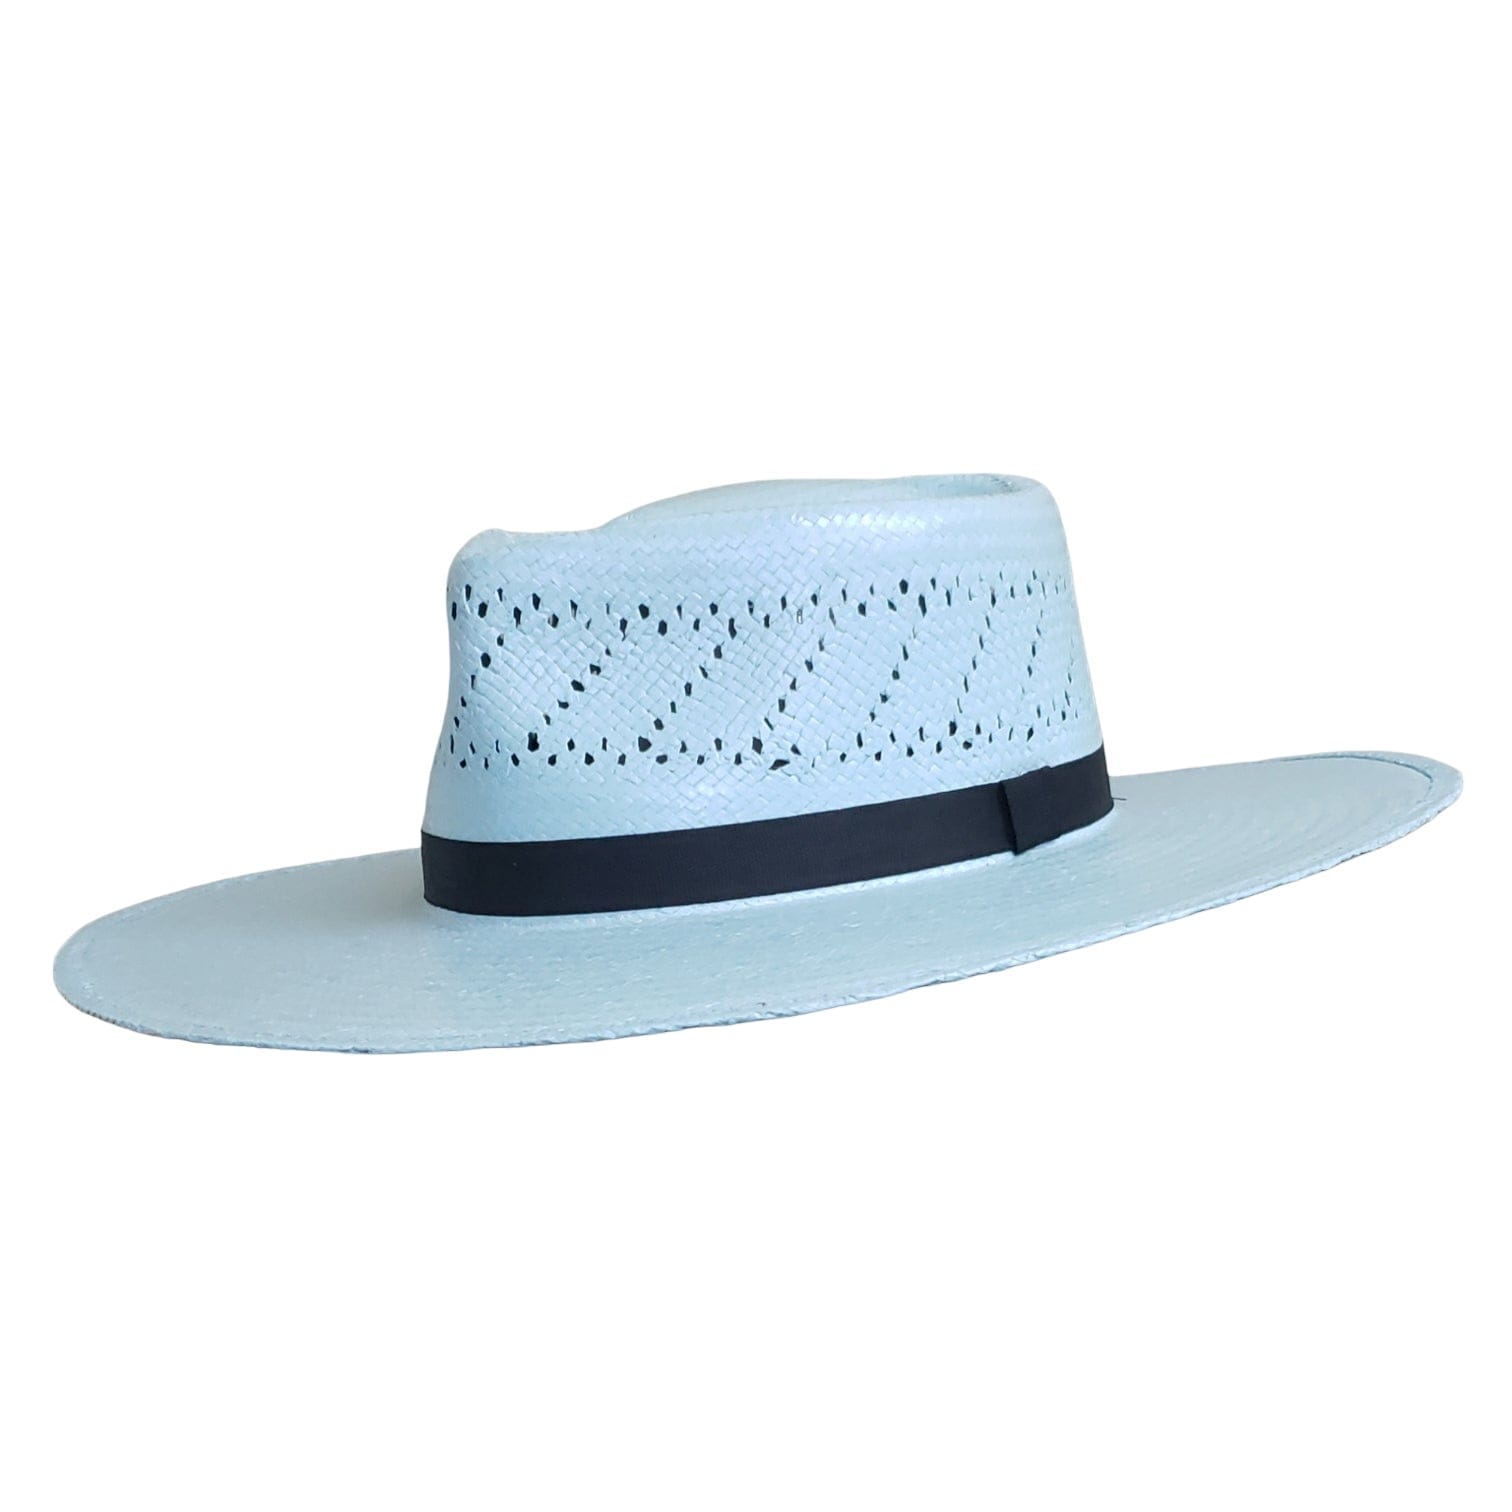 Gone Country Hats Women's Hats Medium  fits 7-1/8 to 7-1/4 Lolita Baby Blue - Straw Shantung